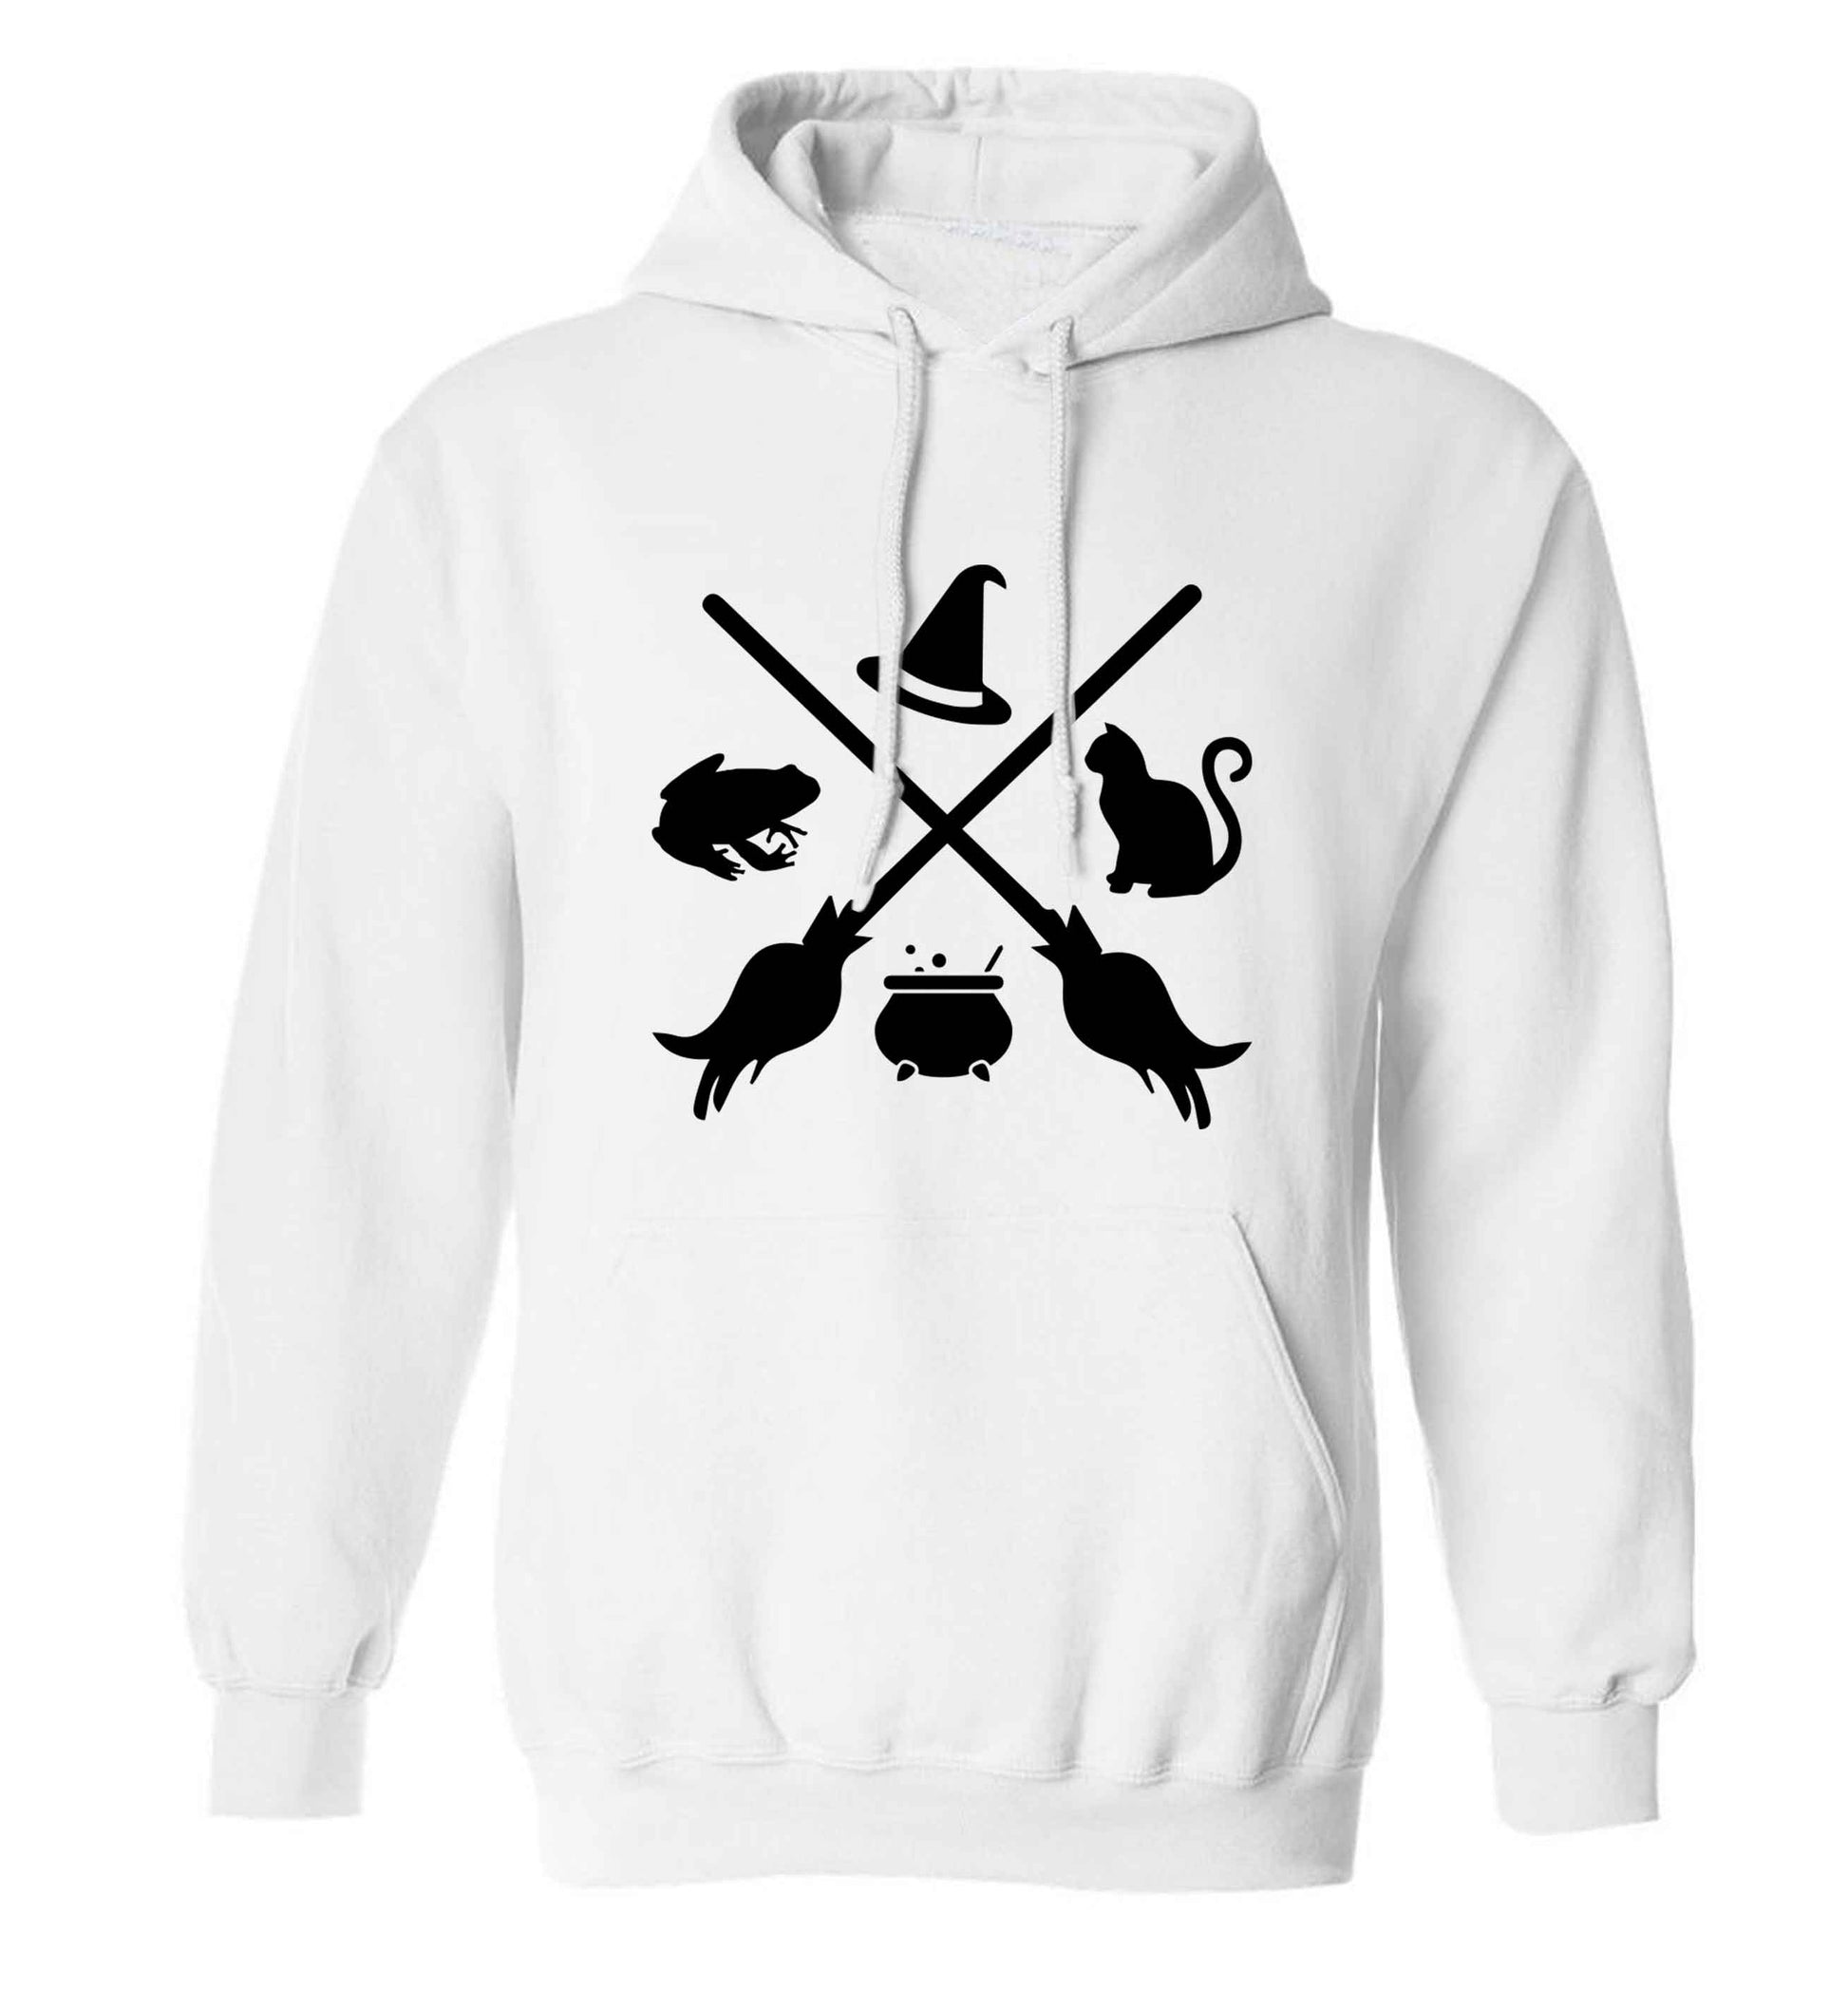 Witch symbol adults unisex white hoodie 2XL